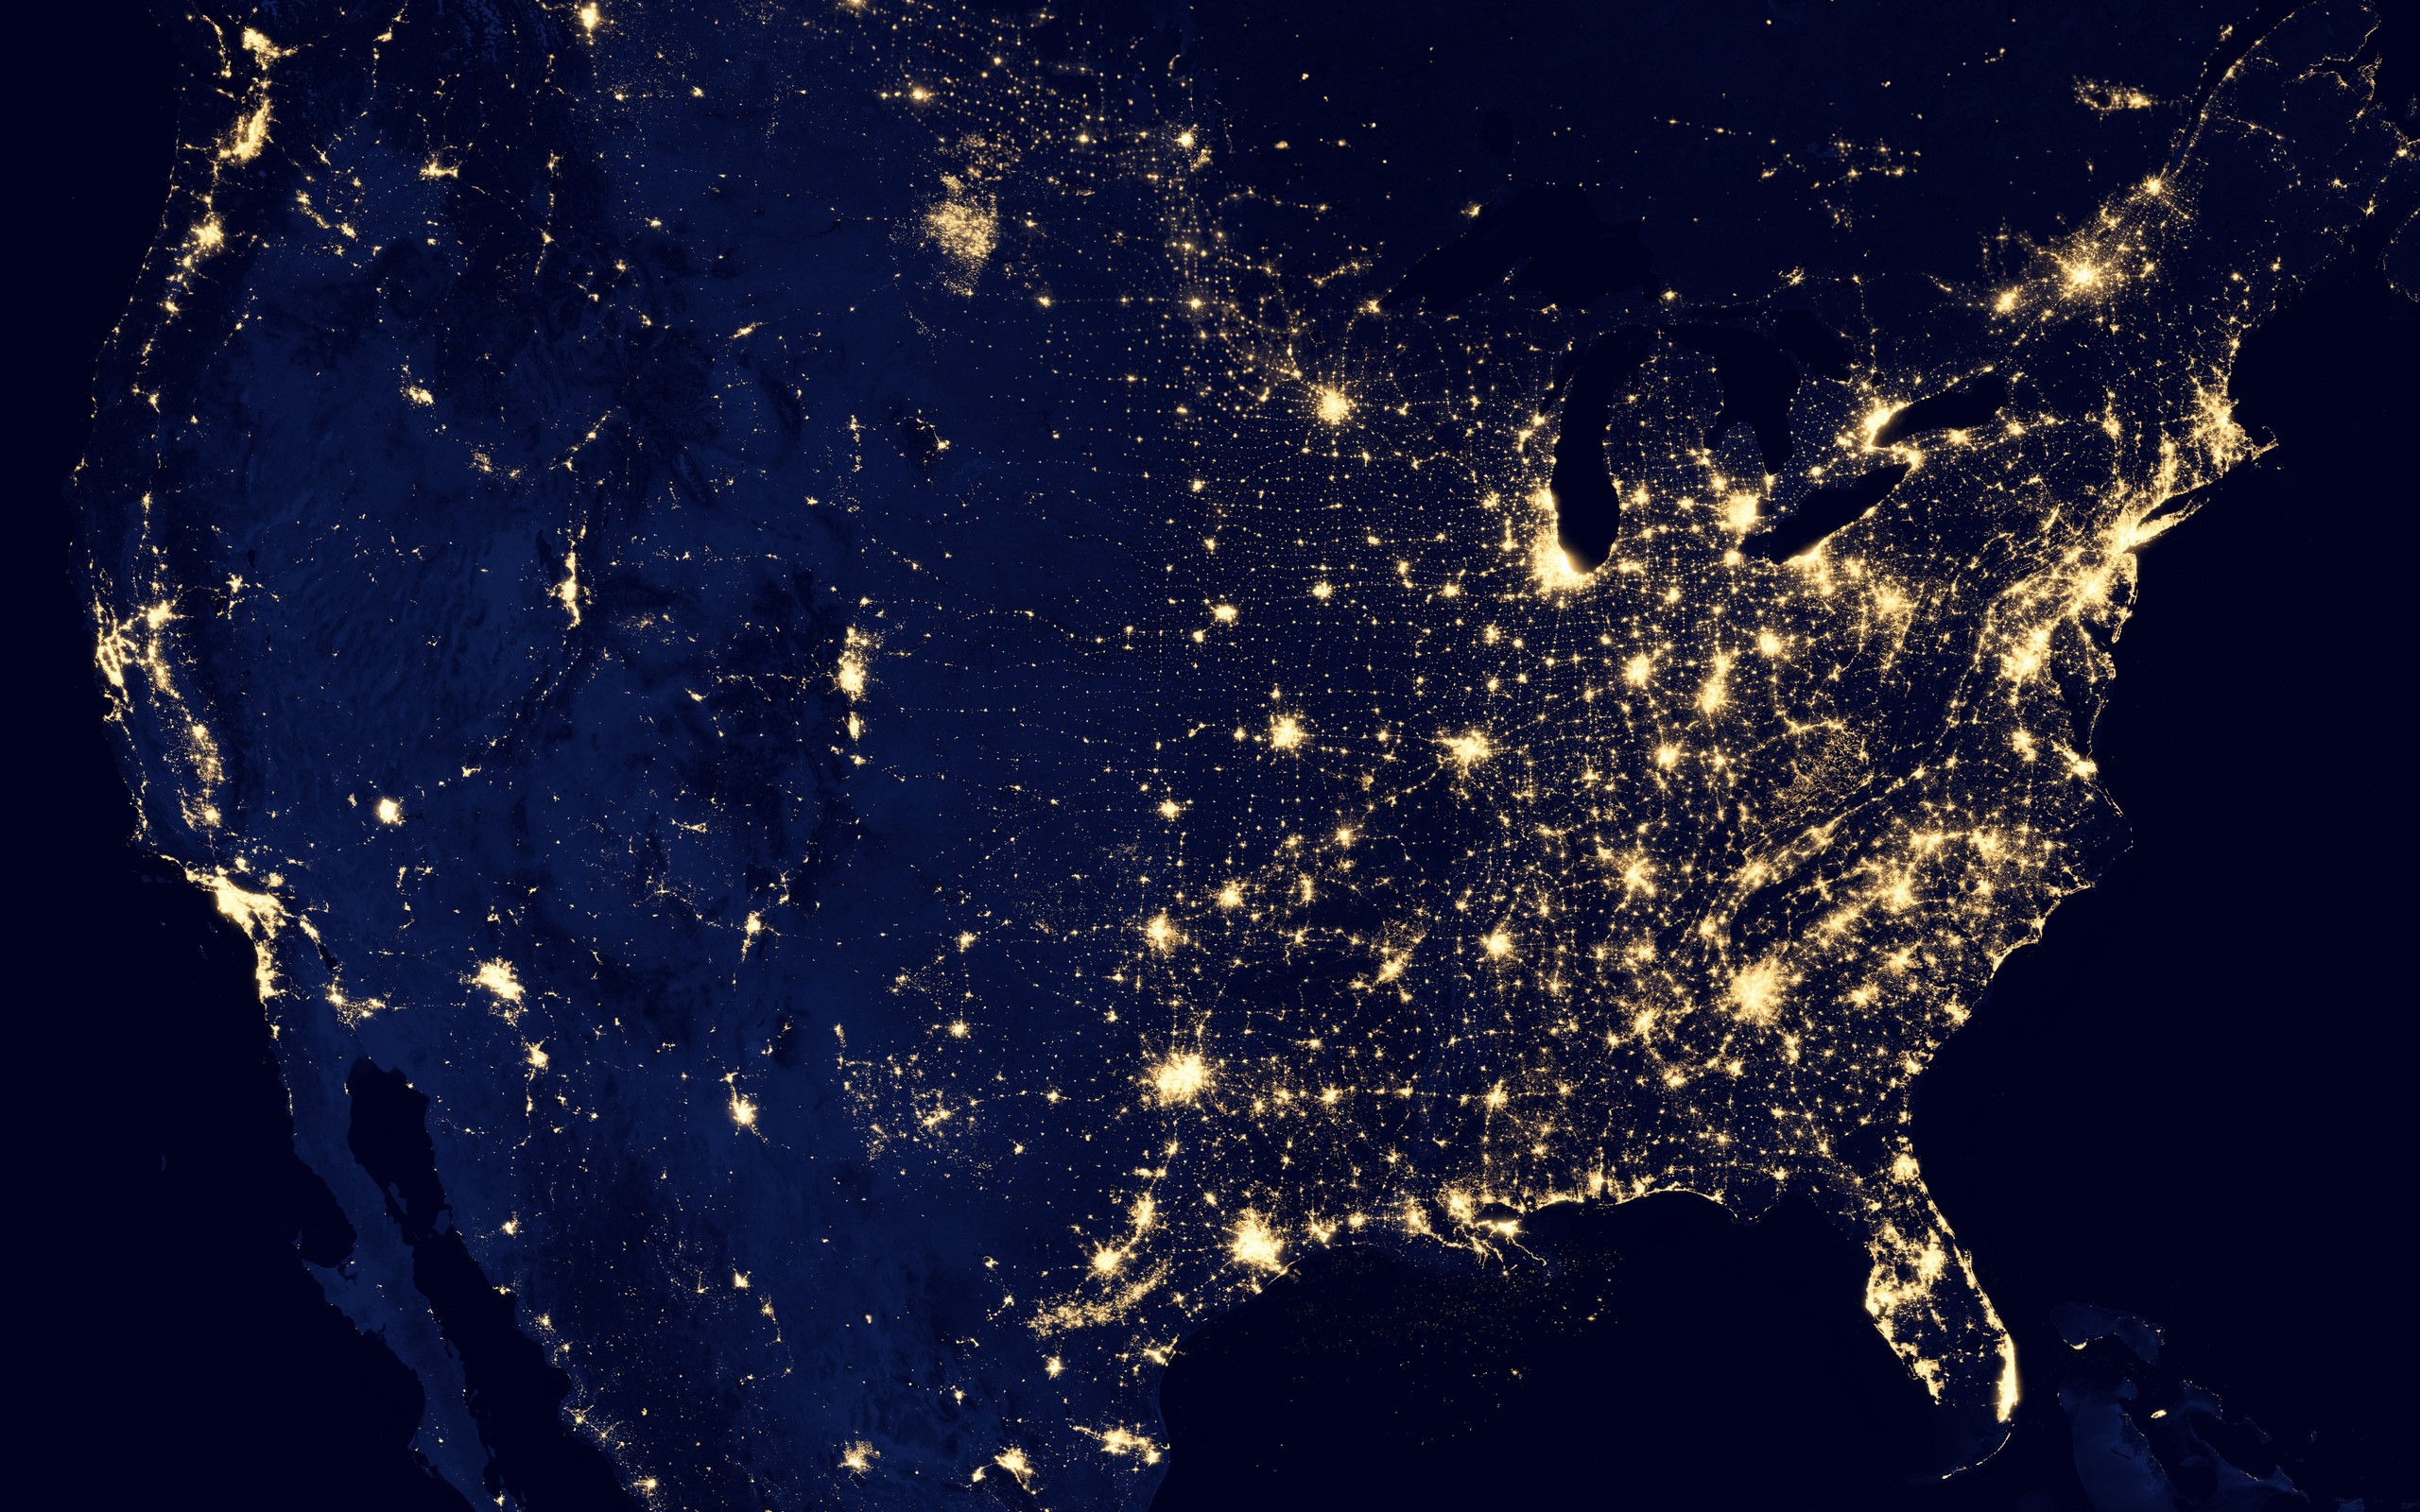 grid, Map, Usa, United, States, Power, Electricity, Night, Lights, Space, America, Cities, Populations, Places, States, Earth, Ocean, Sea, Photography, Nasa, Planets, Sci, Fi, Science Wallpaper